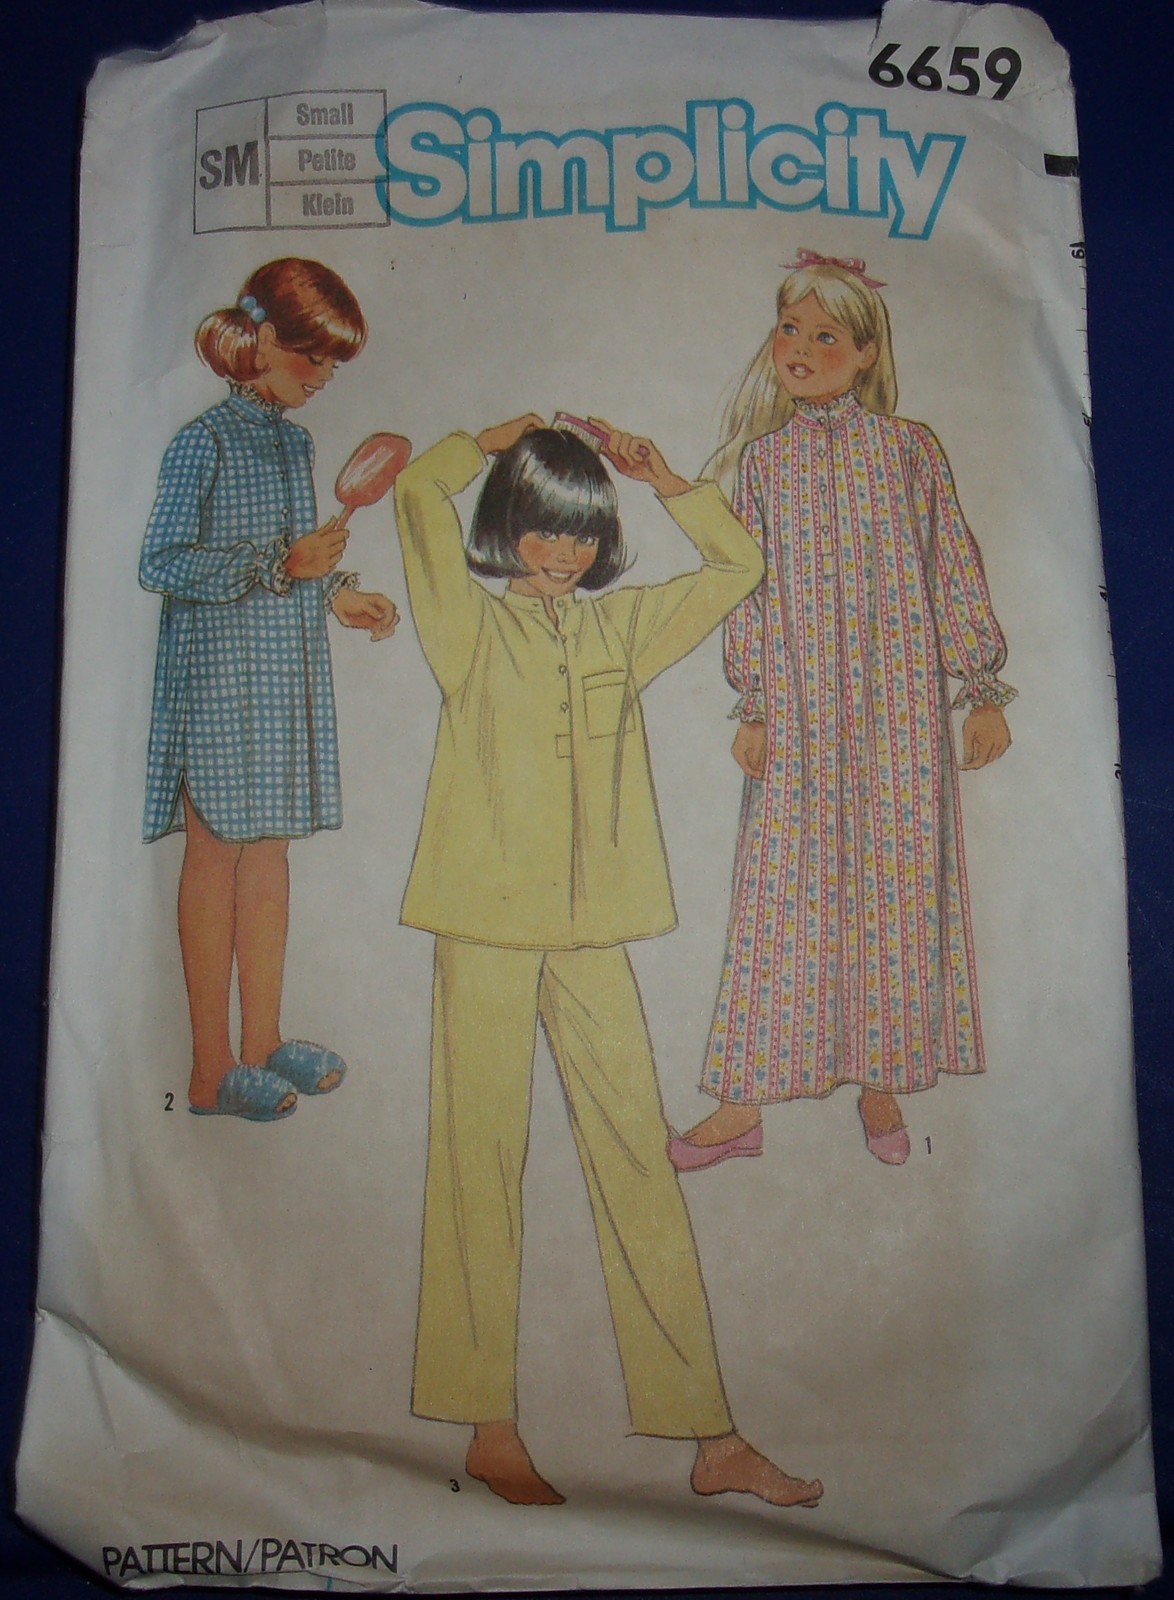 Primary image for Simplicity Girls’ Pajamas & Nightgown Size Small #6659